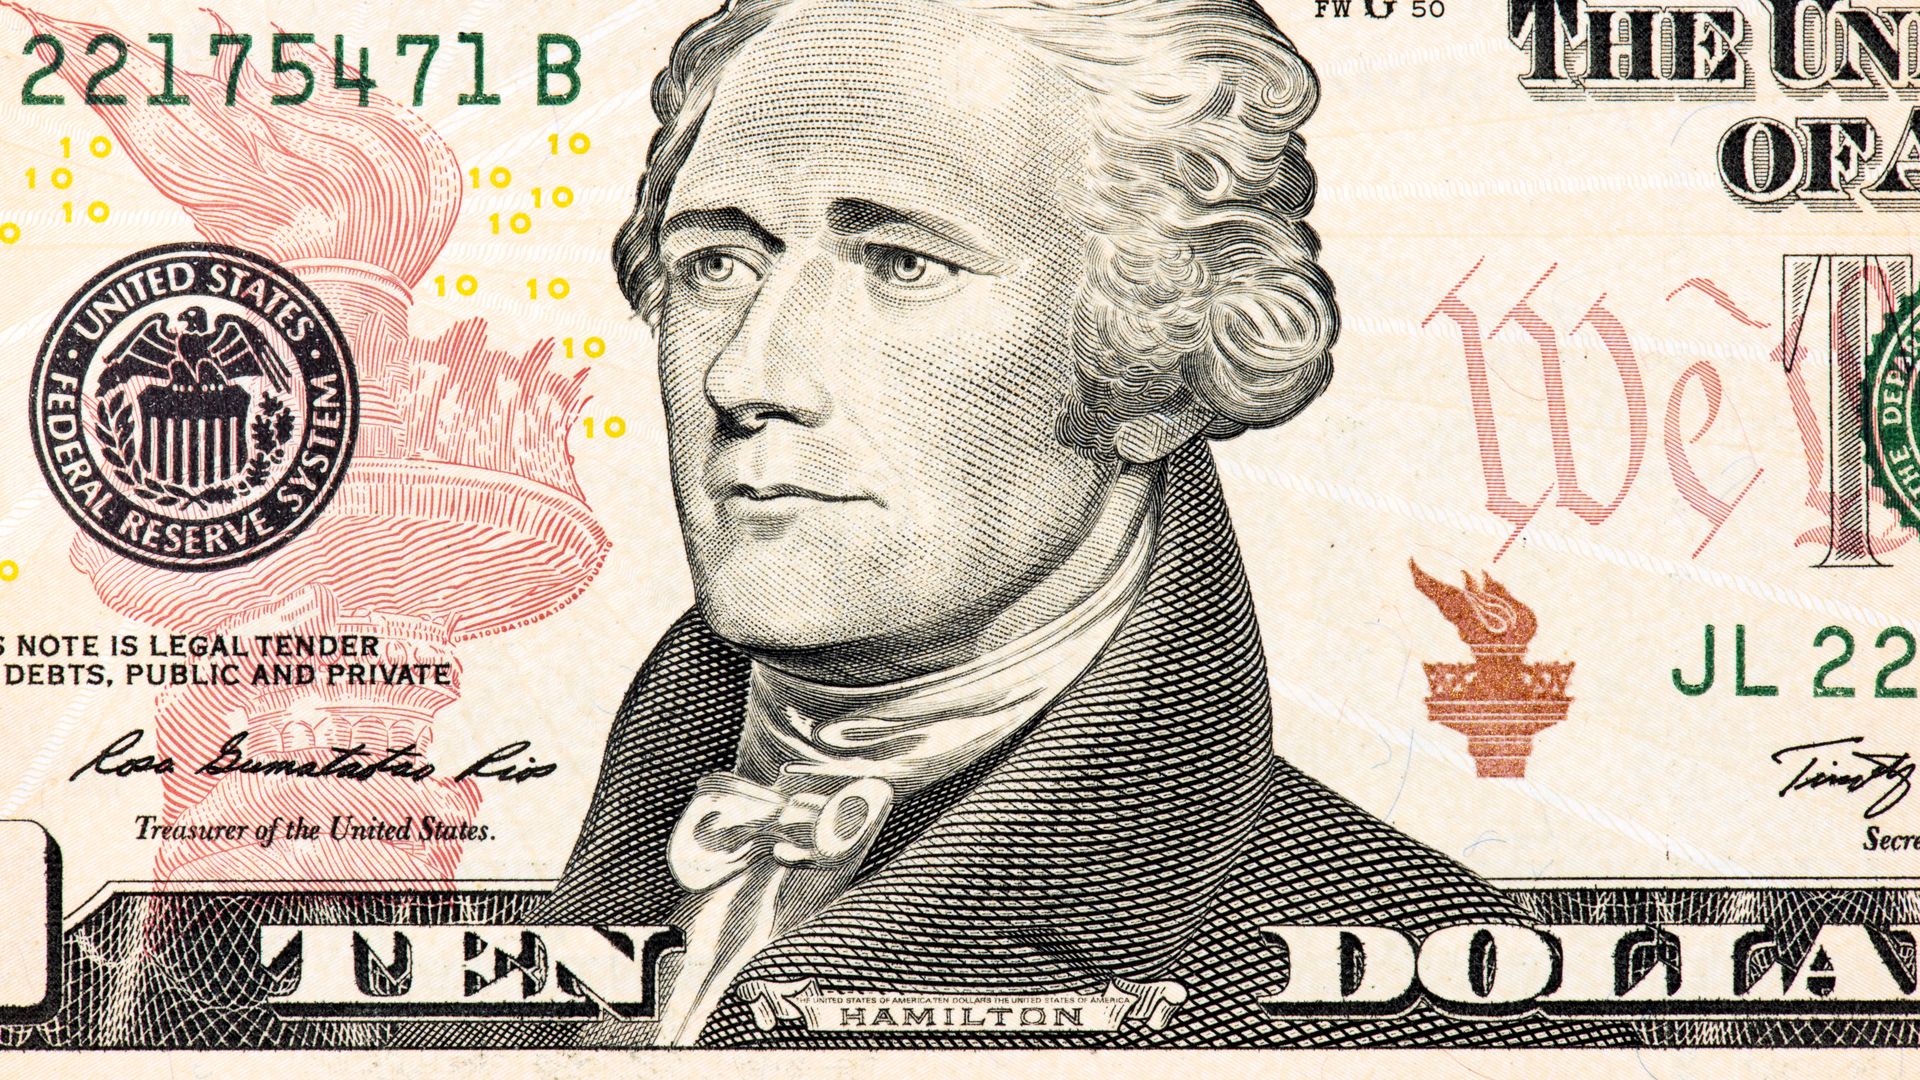 Image of the $10 bill